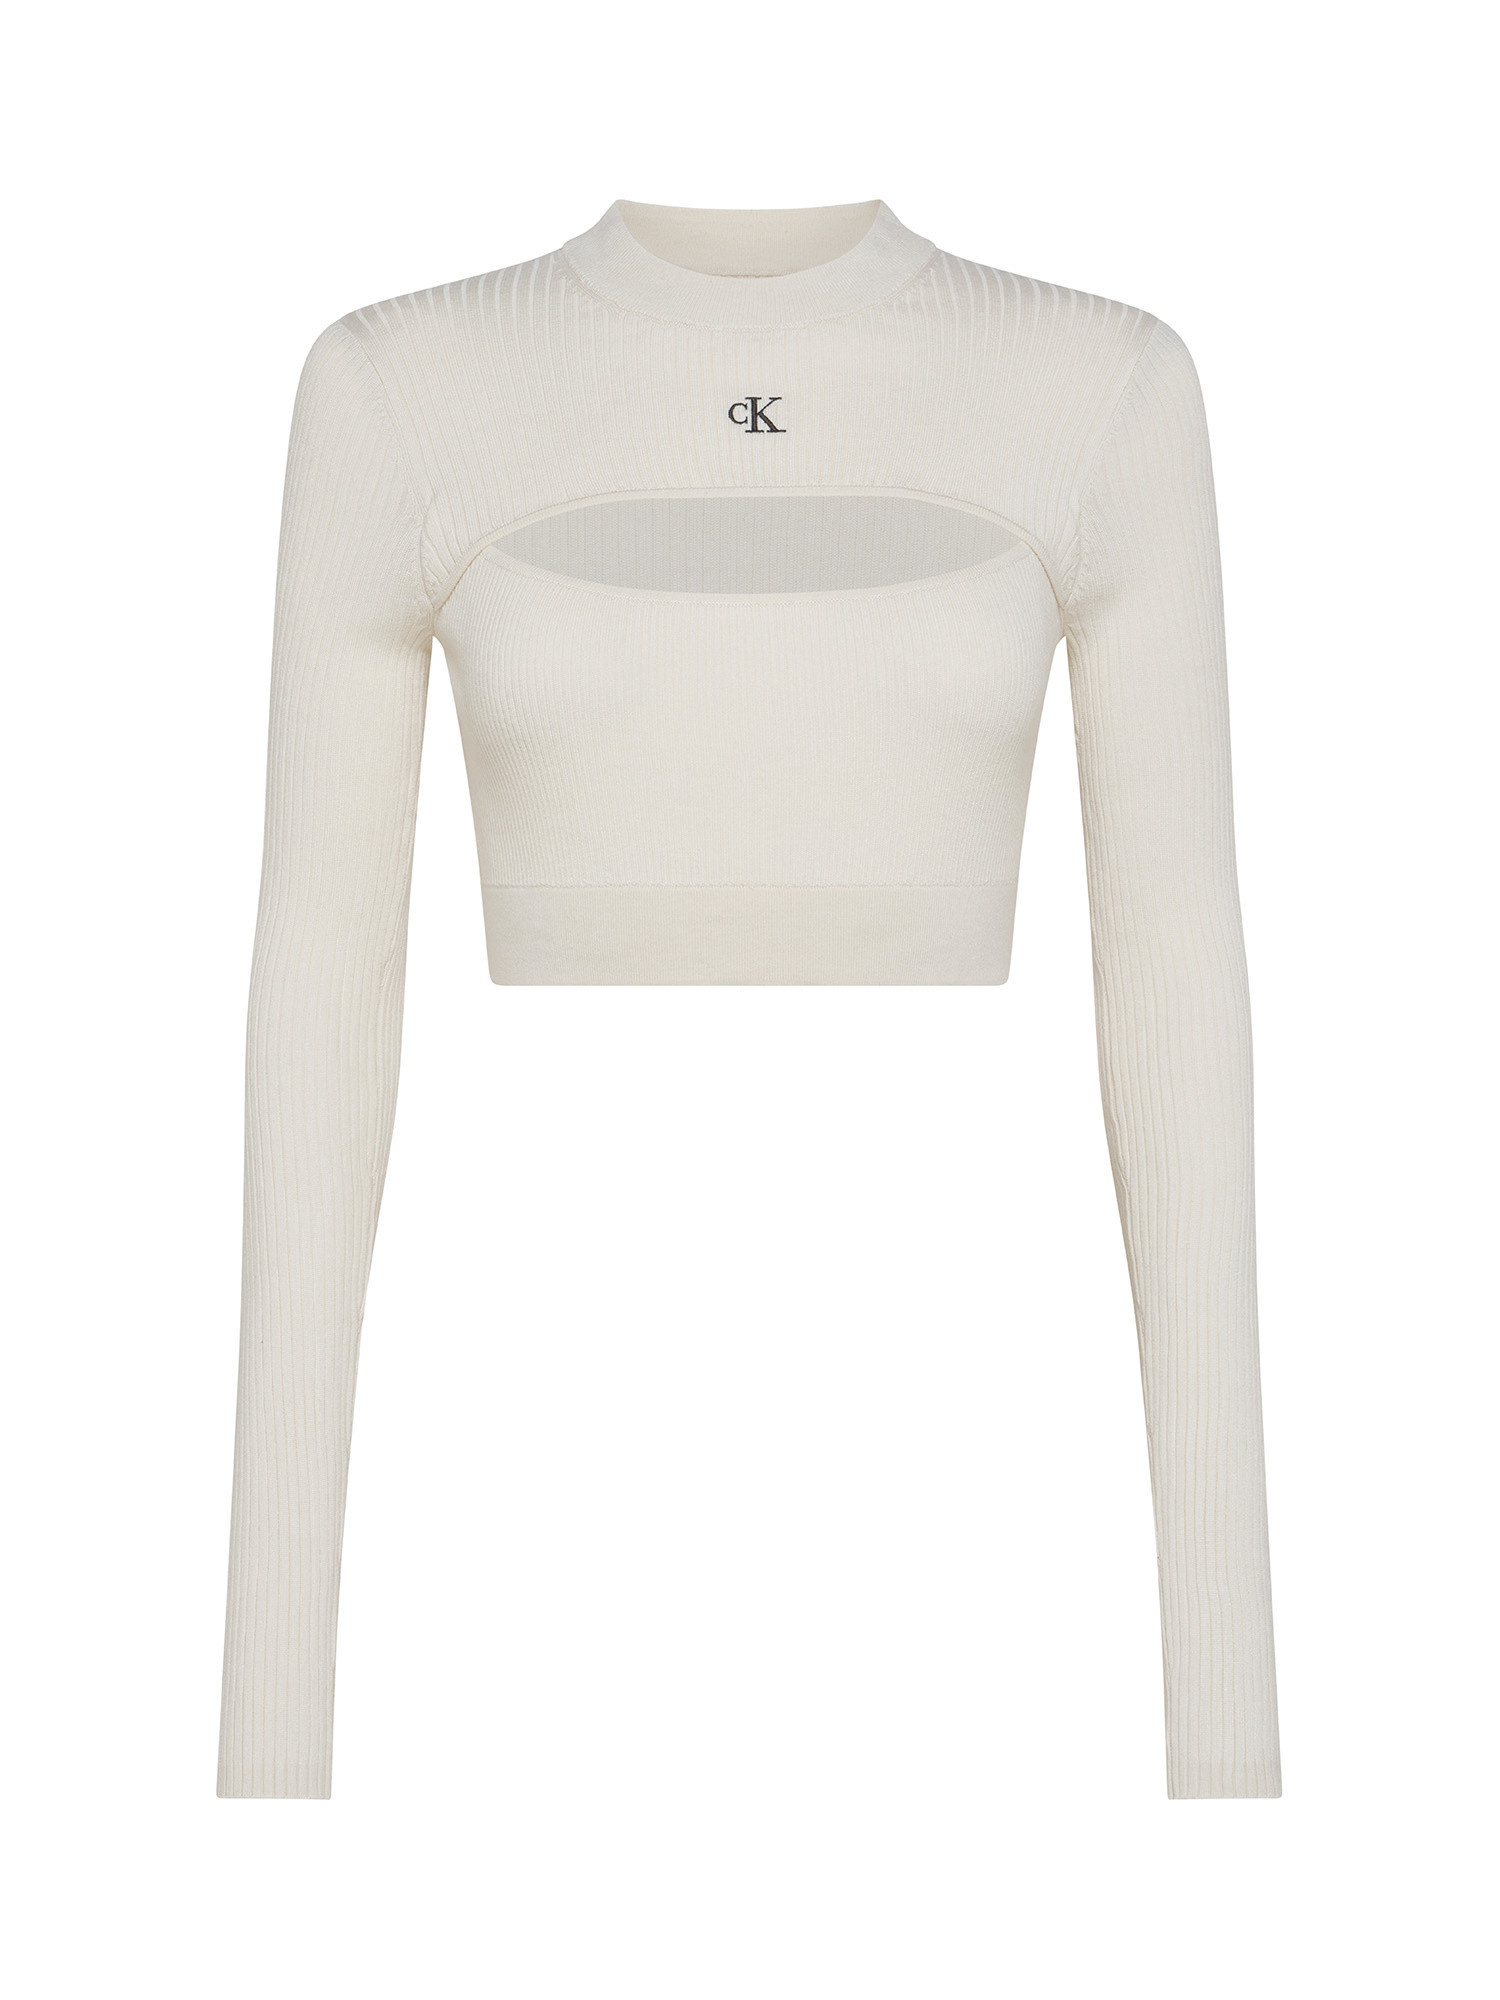 Calvin Klein Jeans - Crop sweater with cut out effect, White Ivory, large image number 0